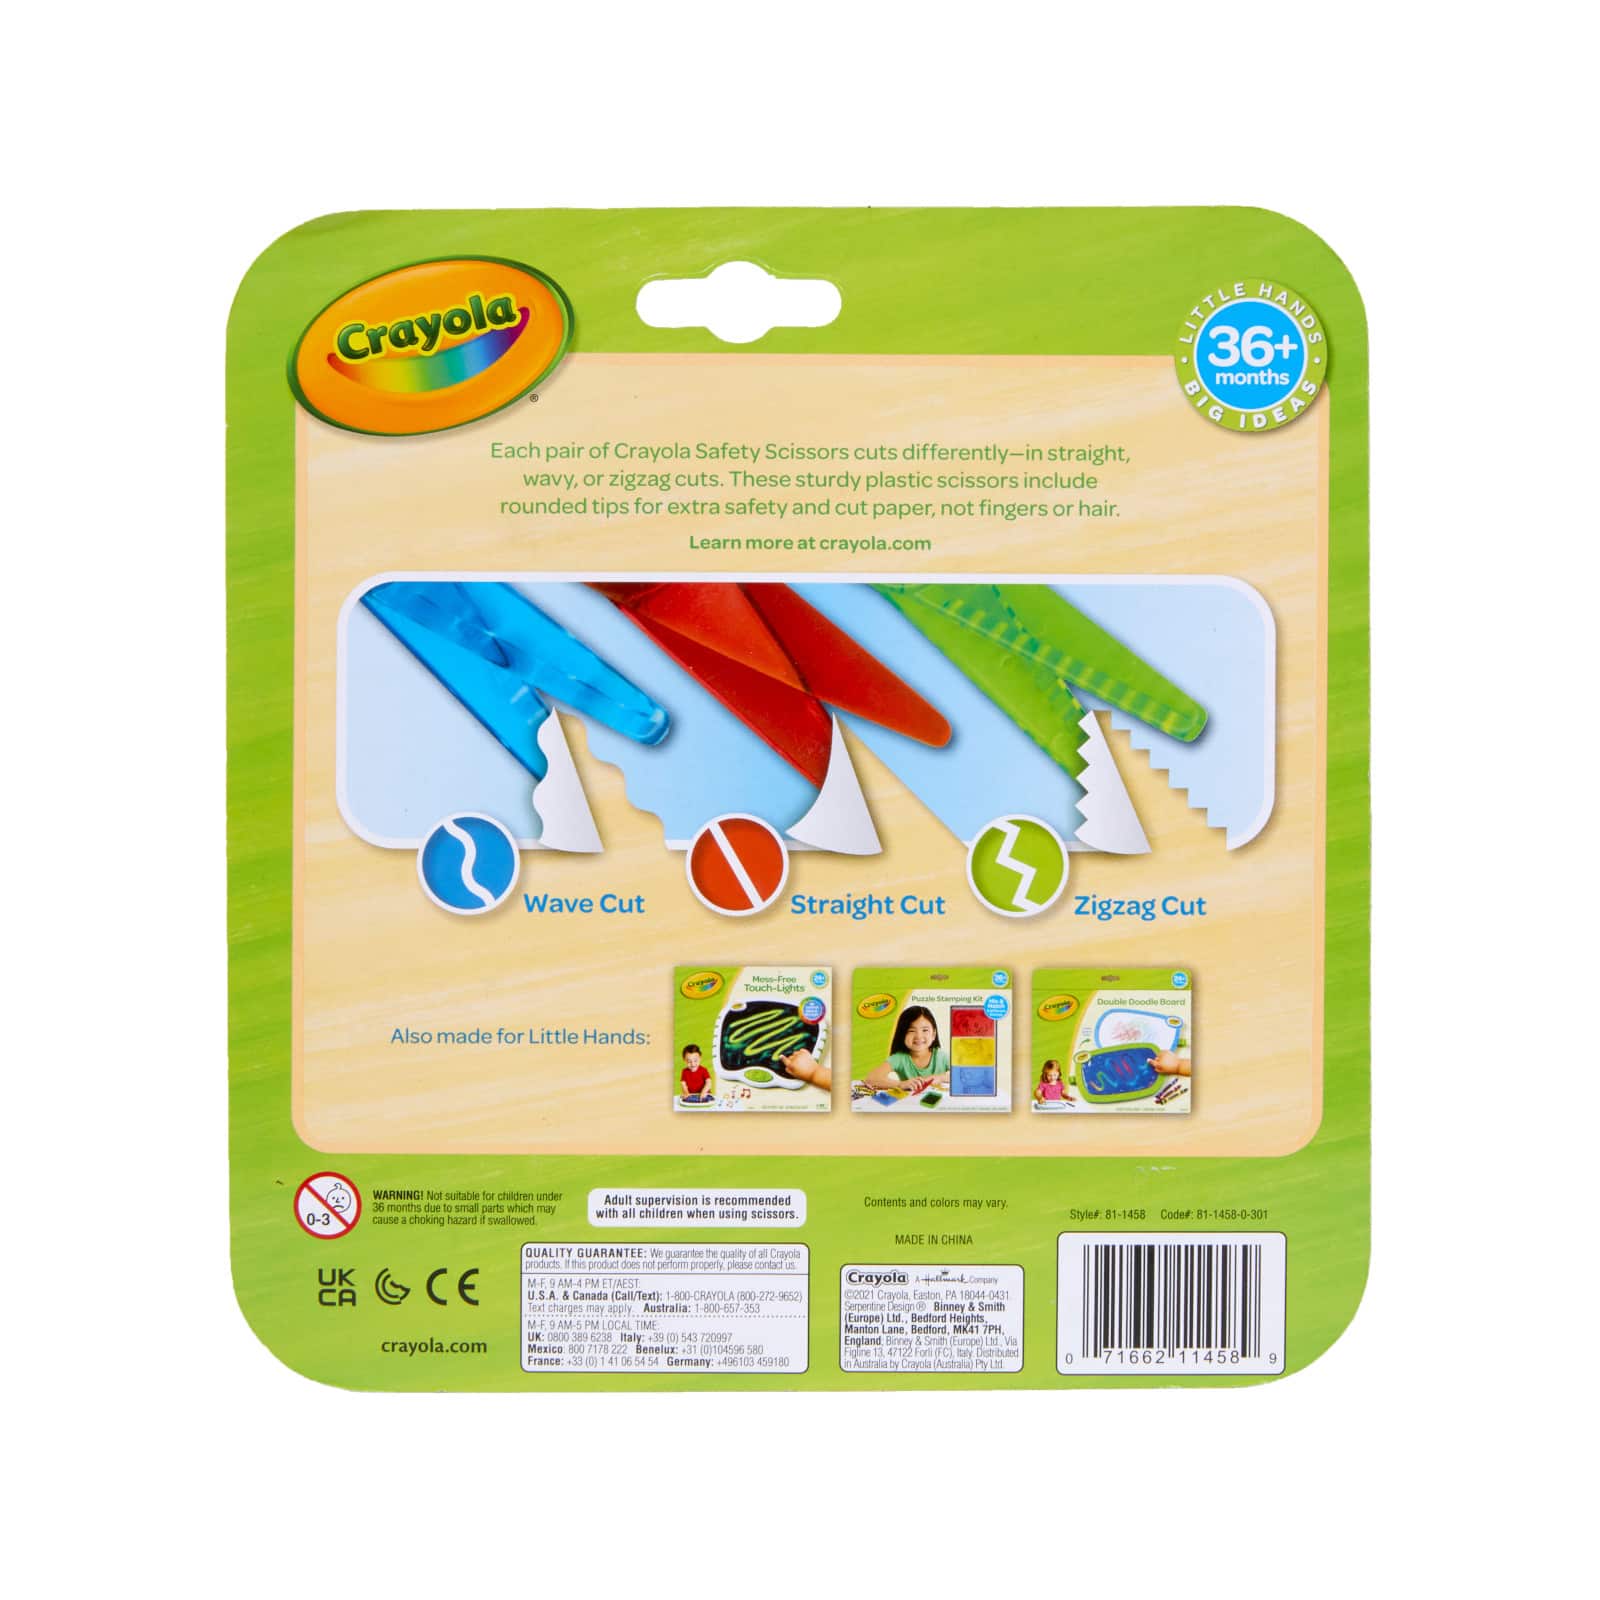 My First Crayola, Safety Scissors, Art Tools, 3 Scissors, Paper Cutting,  Great for Arts and Crafts for Preschoolers